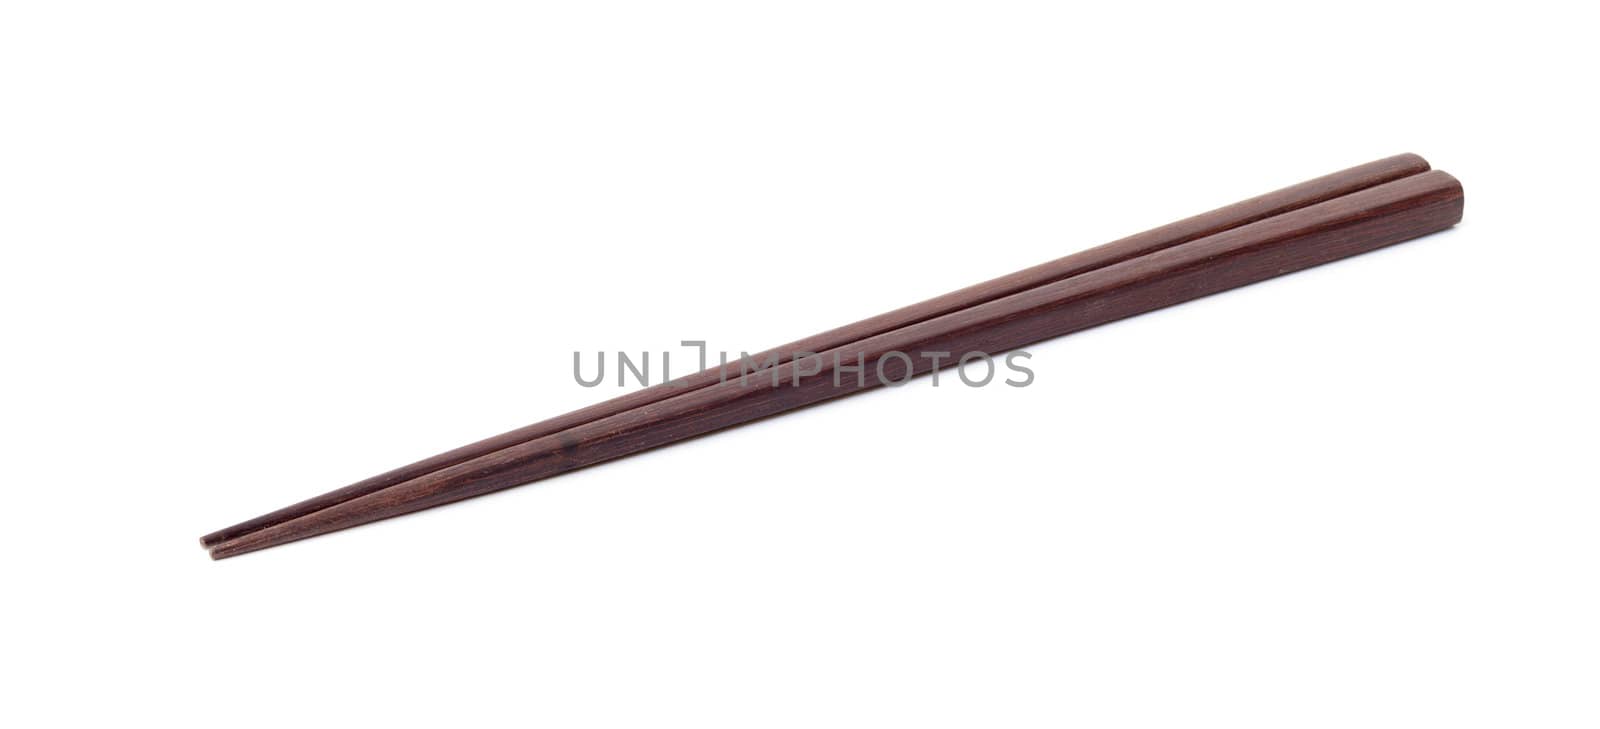 Two Brown Chopsticks by Discovod